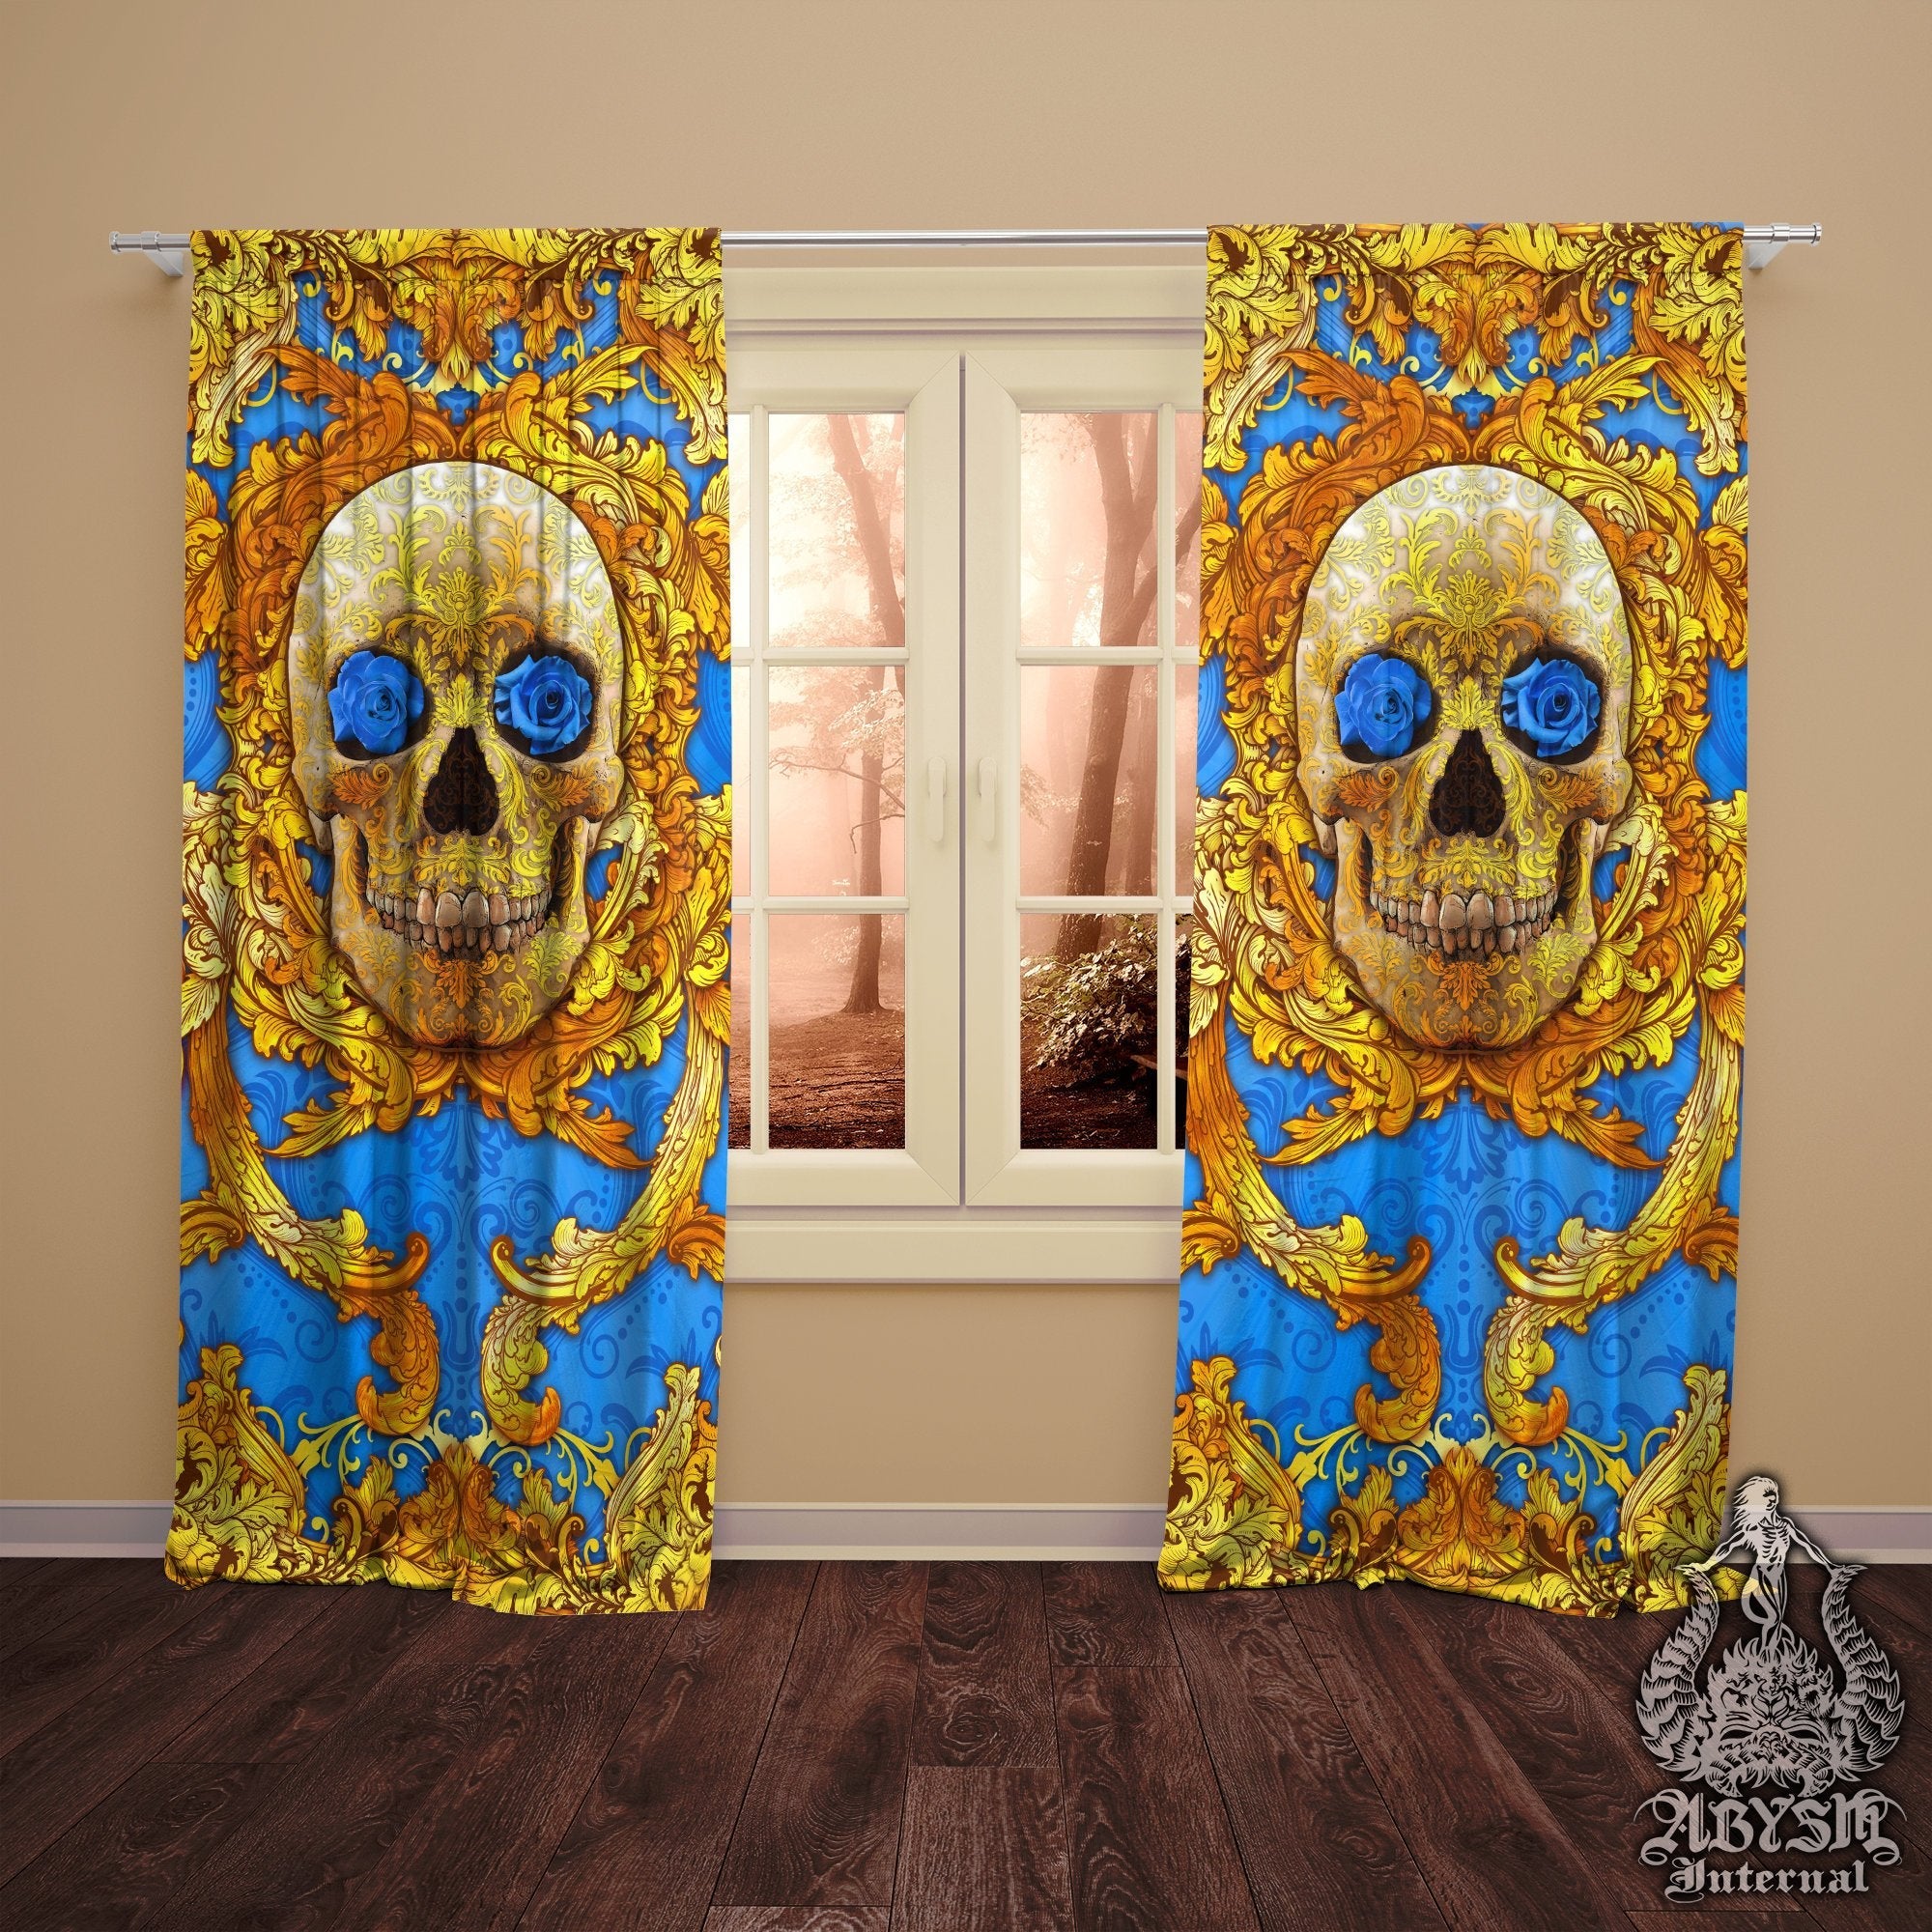 Skull Blackout Curtains, Long Window Panels, Vintage Art Print, Victorian Decor, Funky and Eclectic Home Decor - Cyan & Gold - Abysm Internal